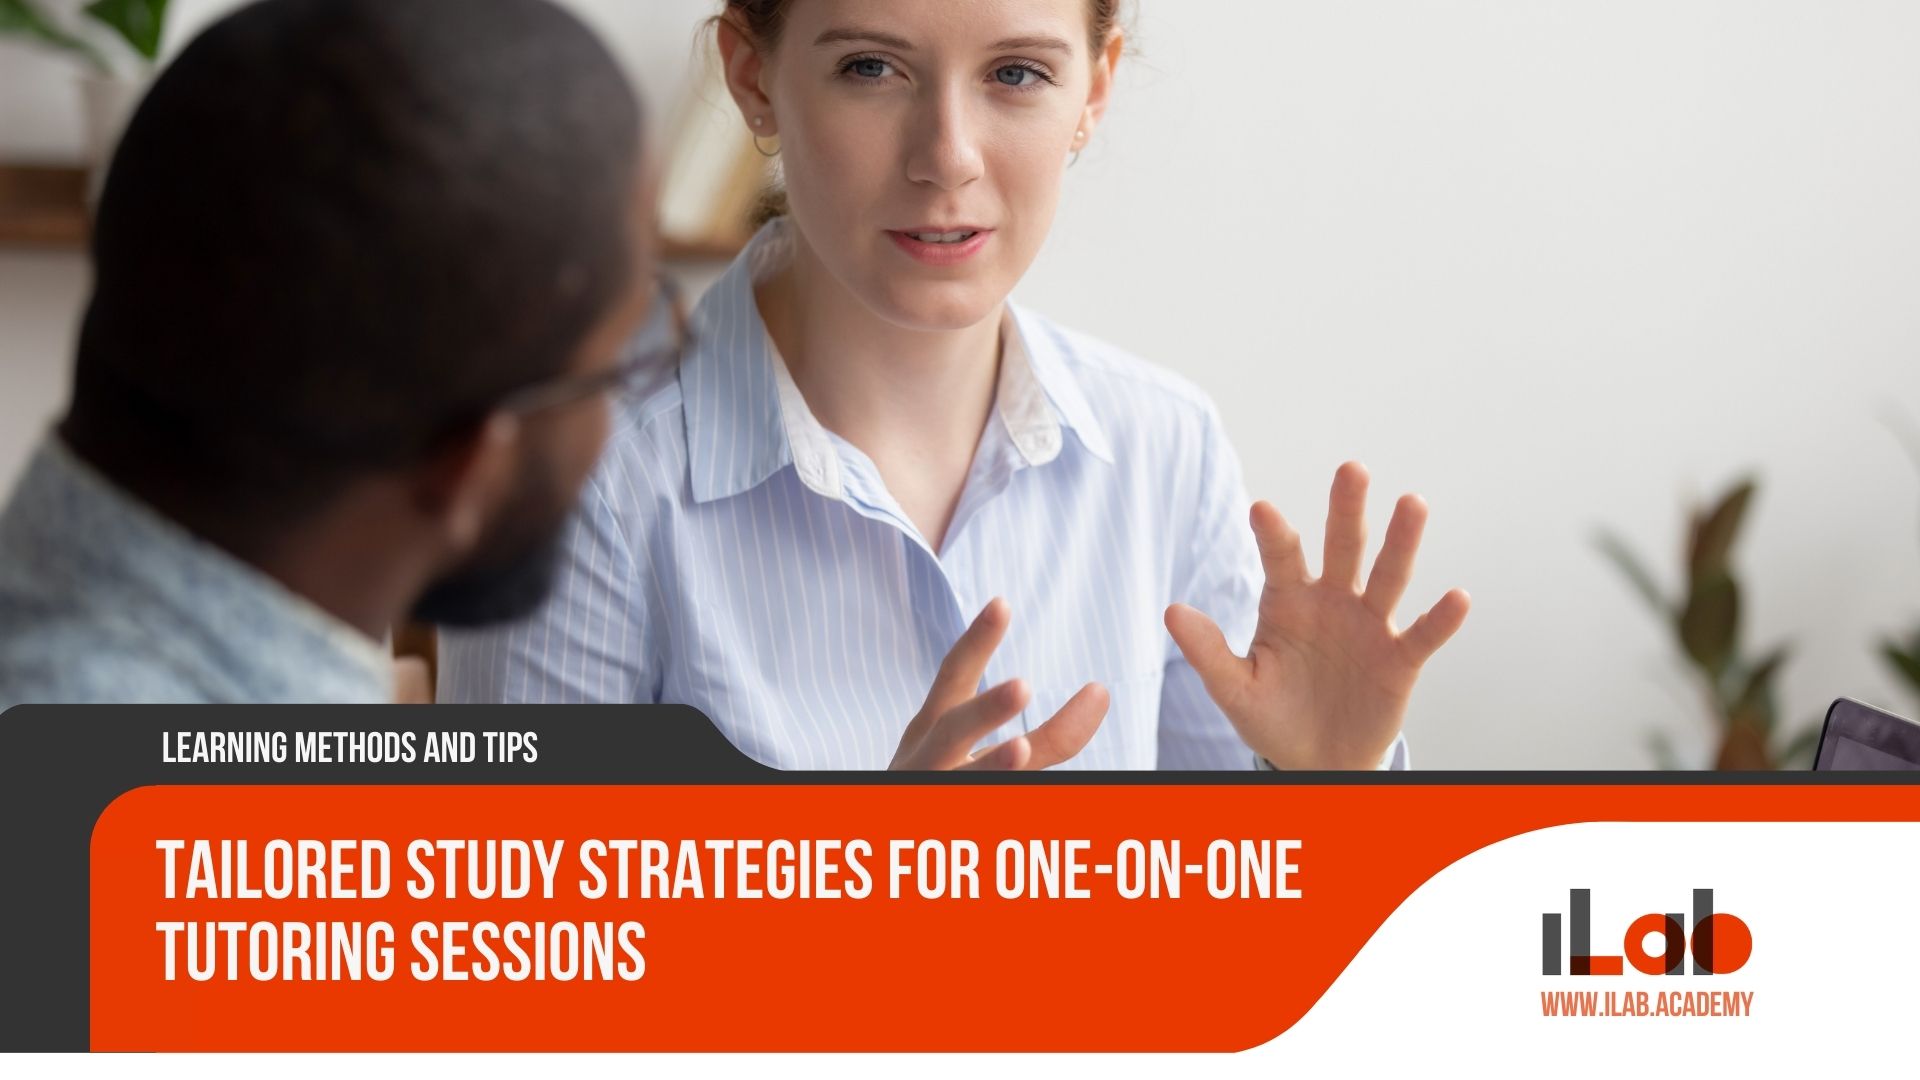 Tailored Study Strategies for One-on-One Tutoring Sessions